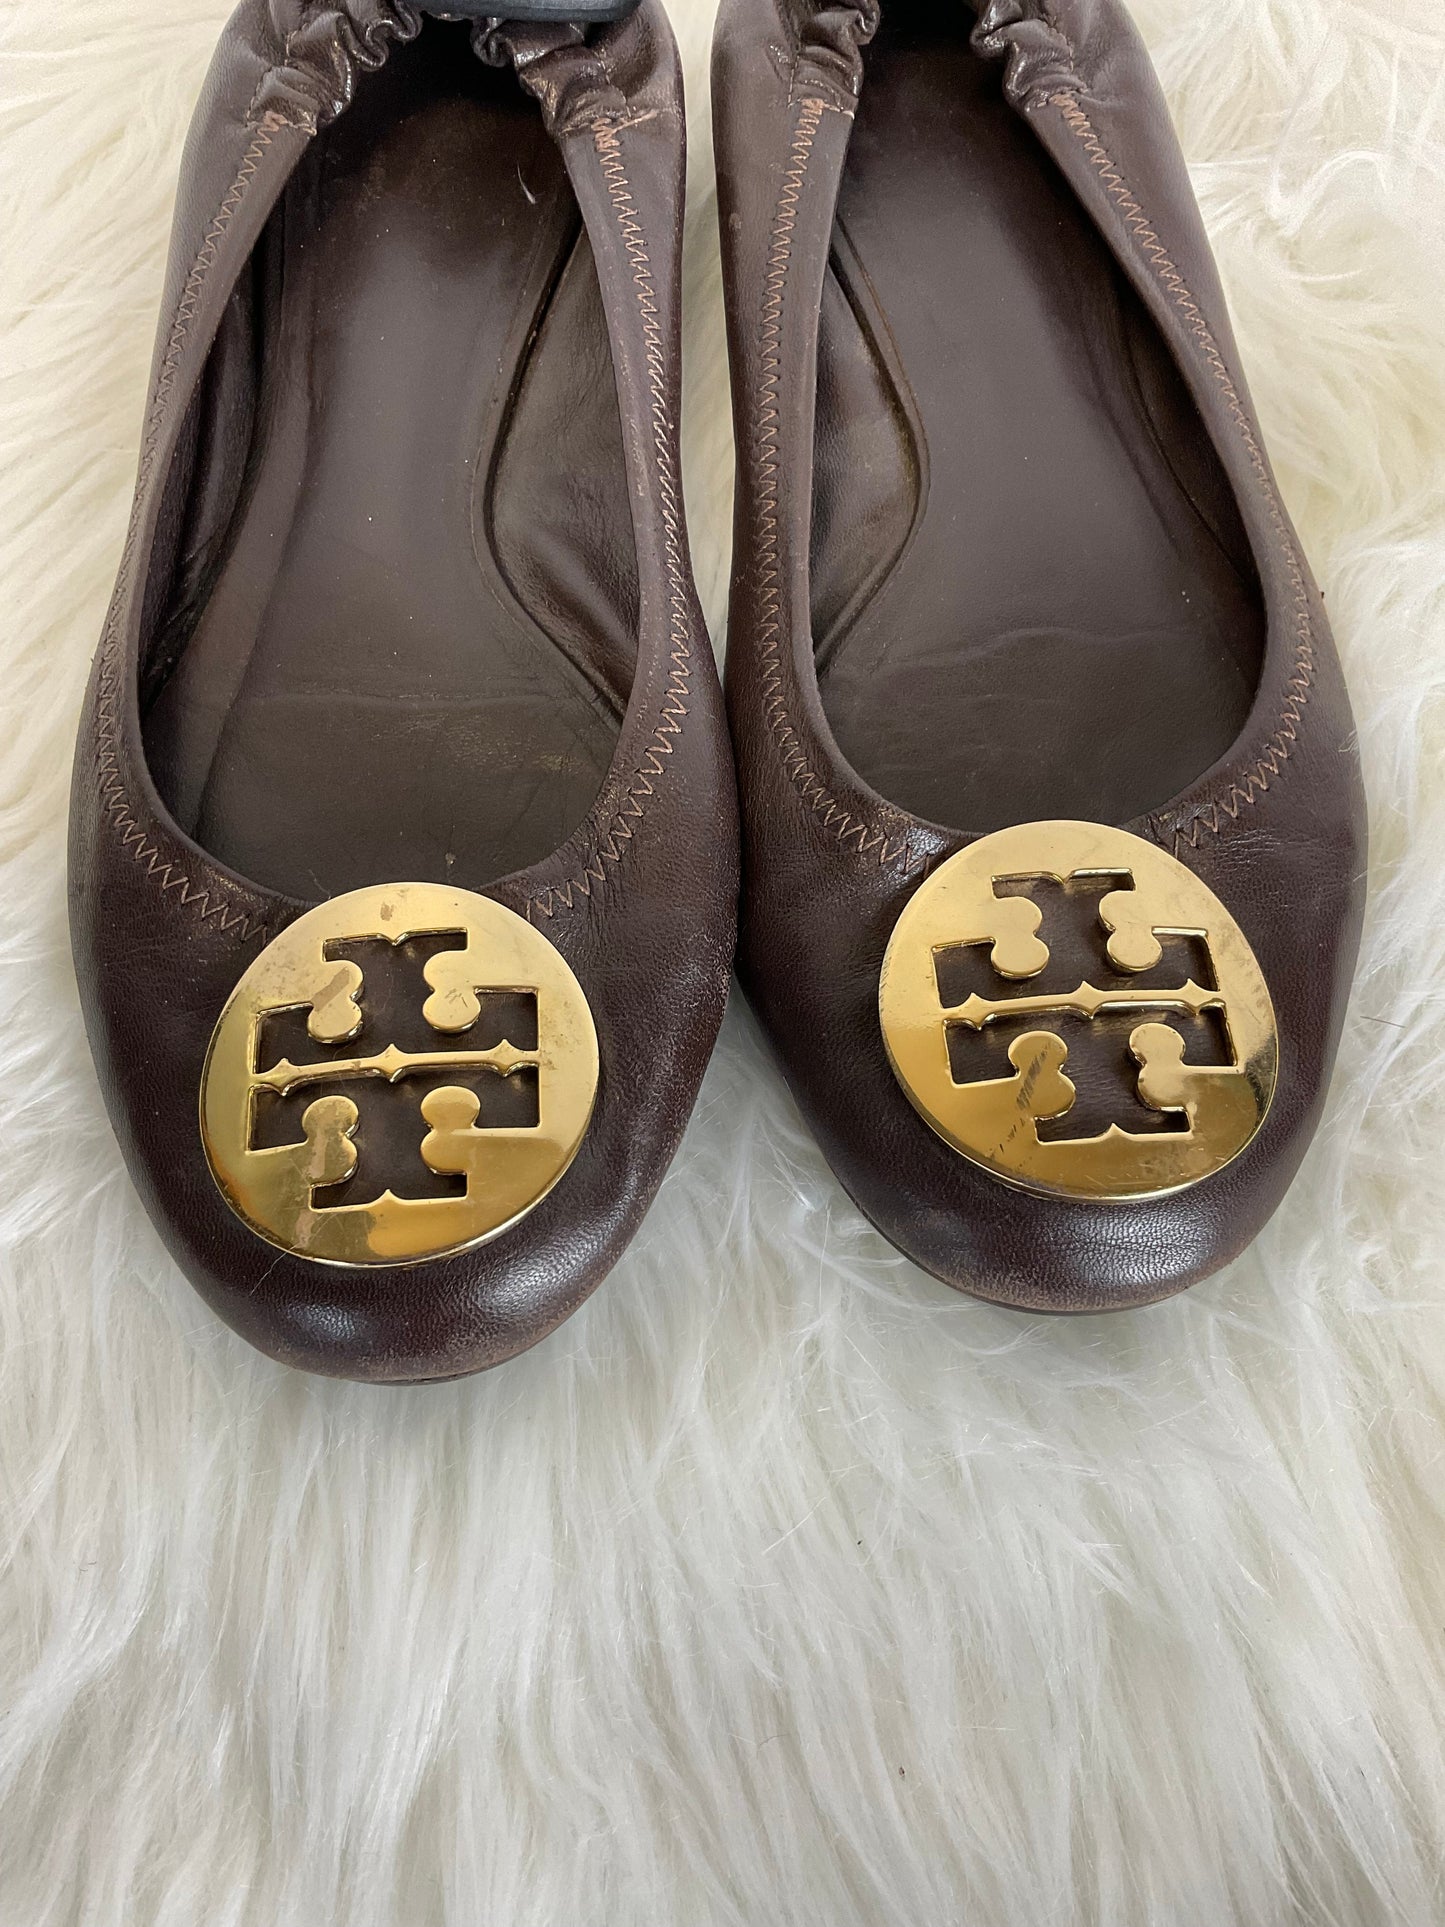 Brown Shoes Designer Tory Burch, Size 7